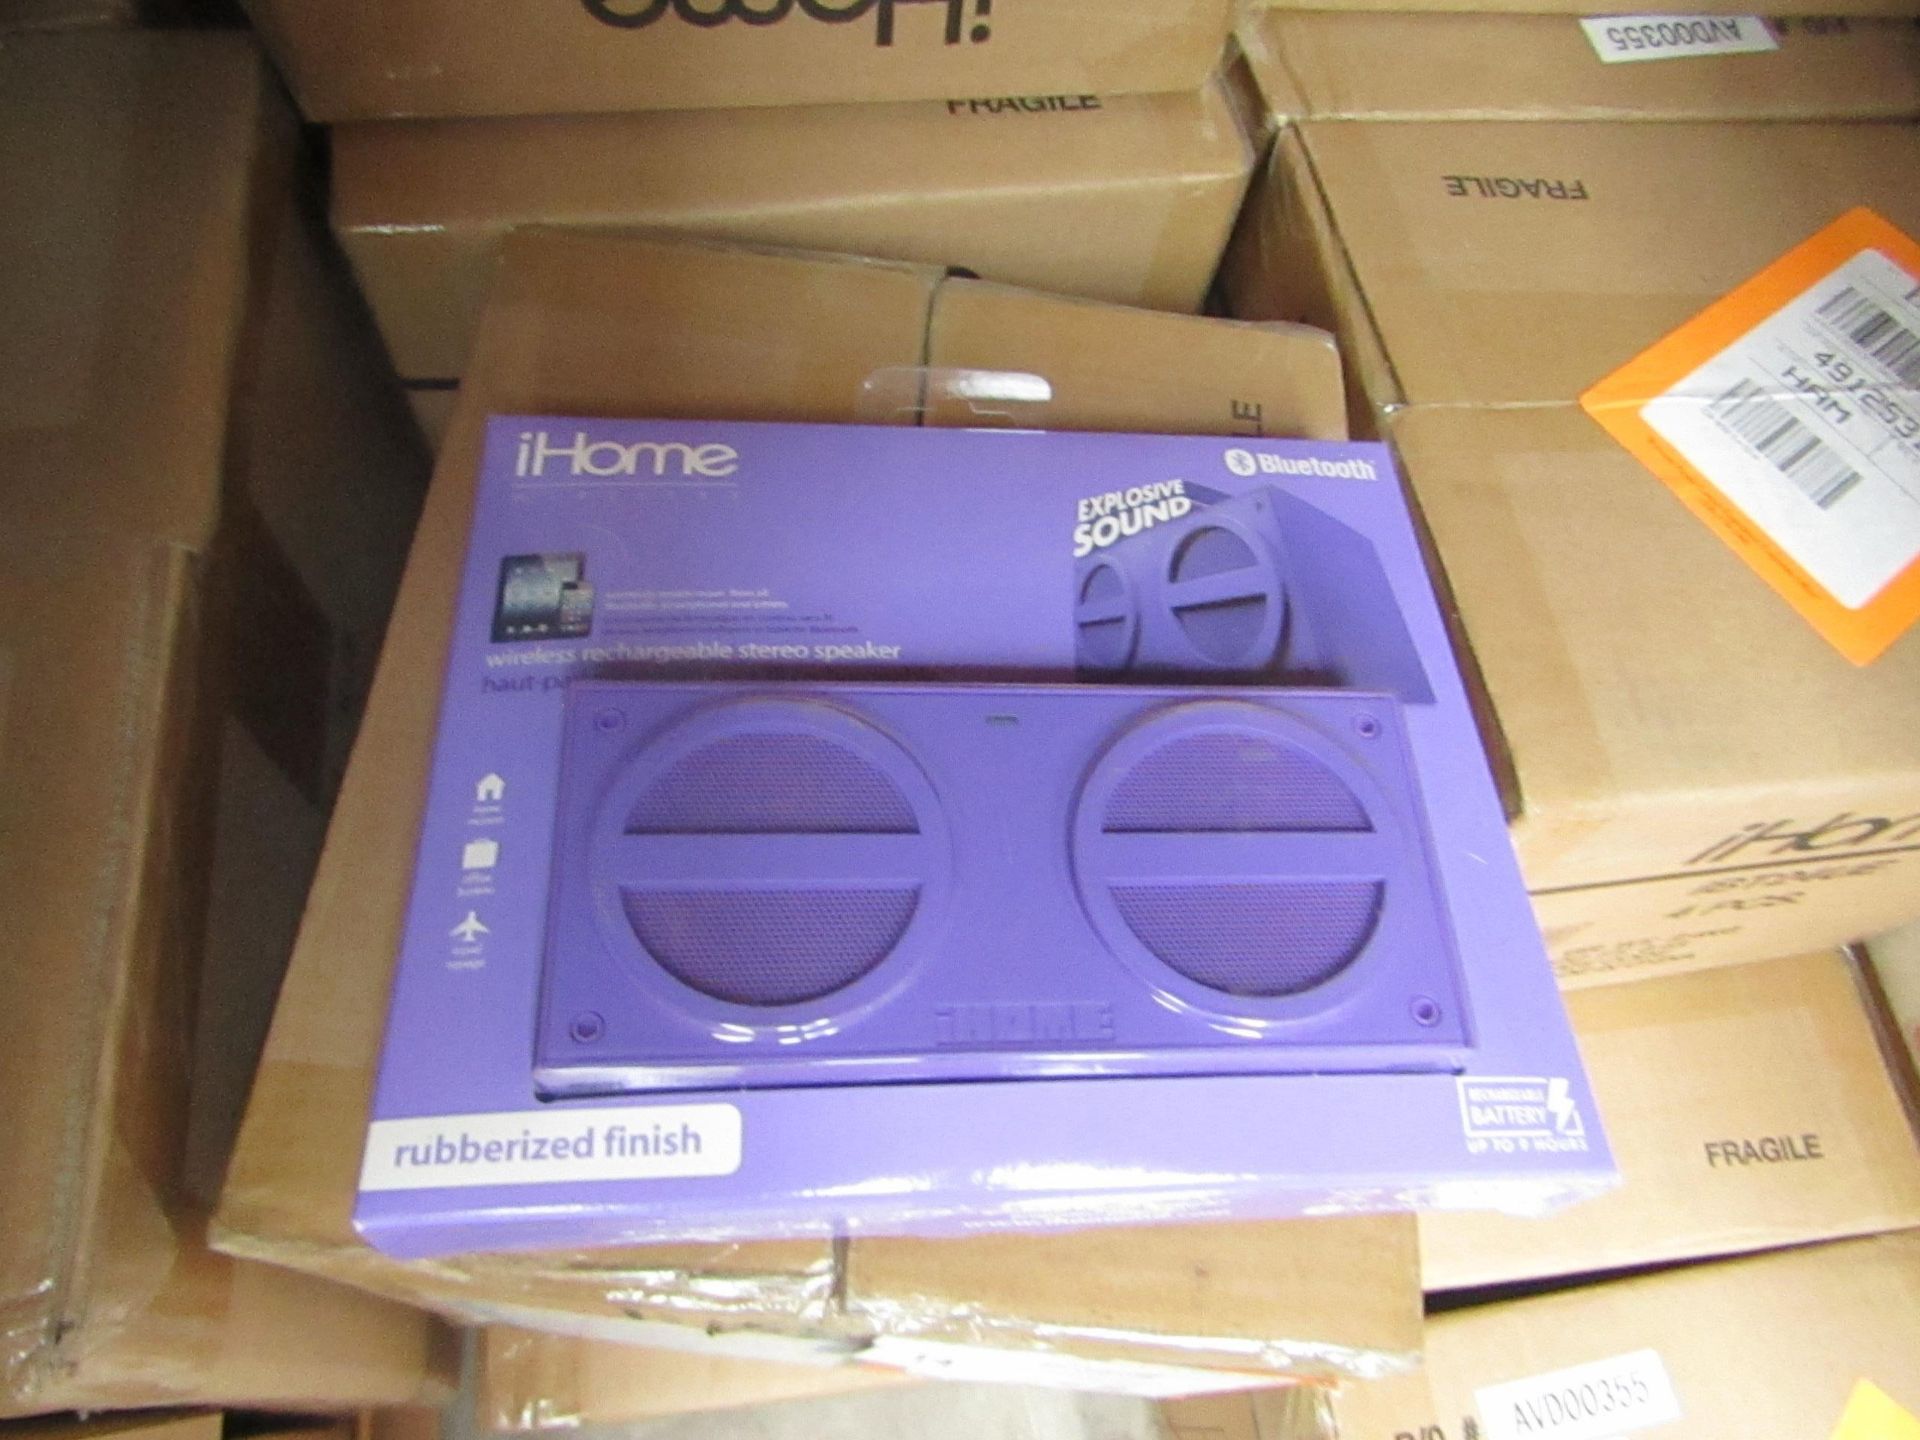 12x iHome wireless Bluetooth stereo speaker, new and packaged.